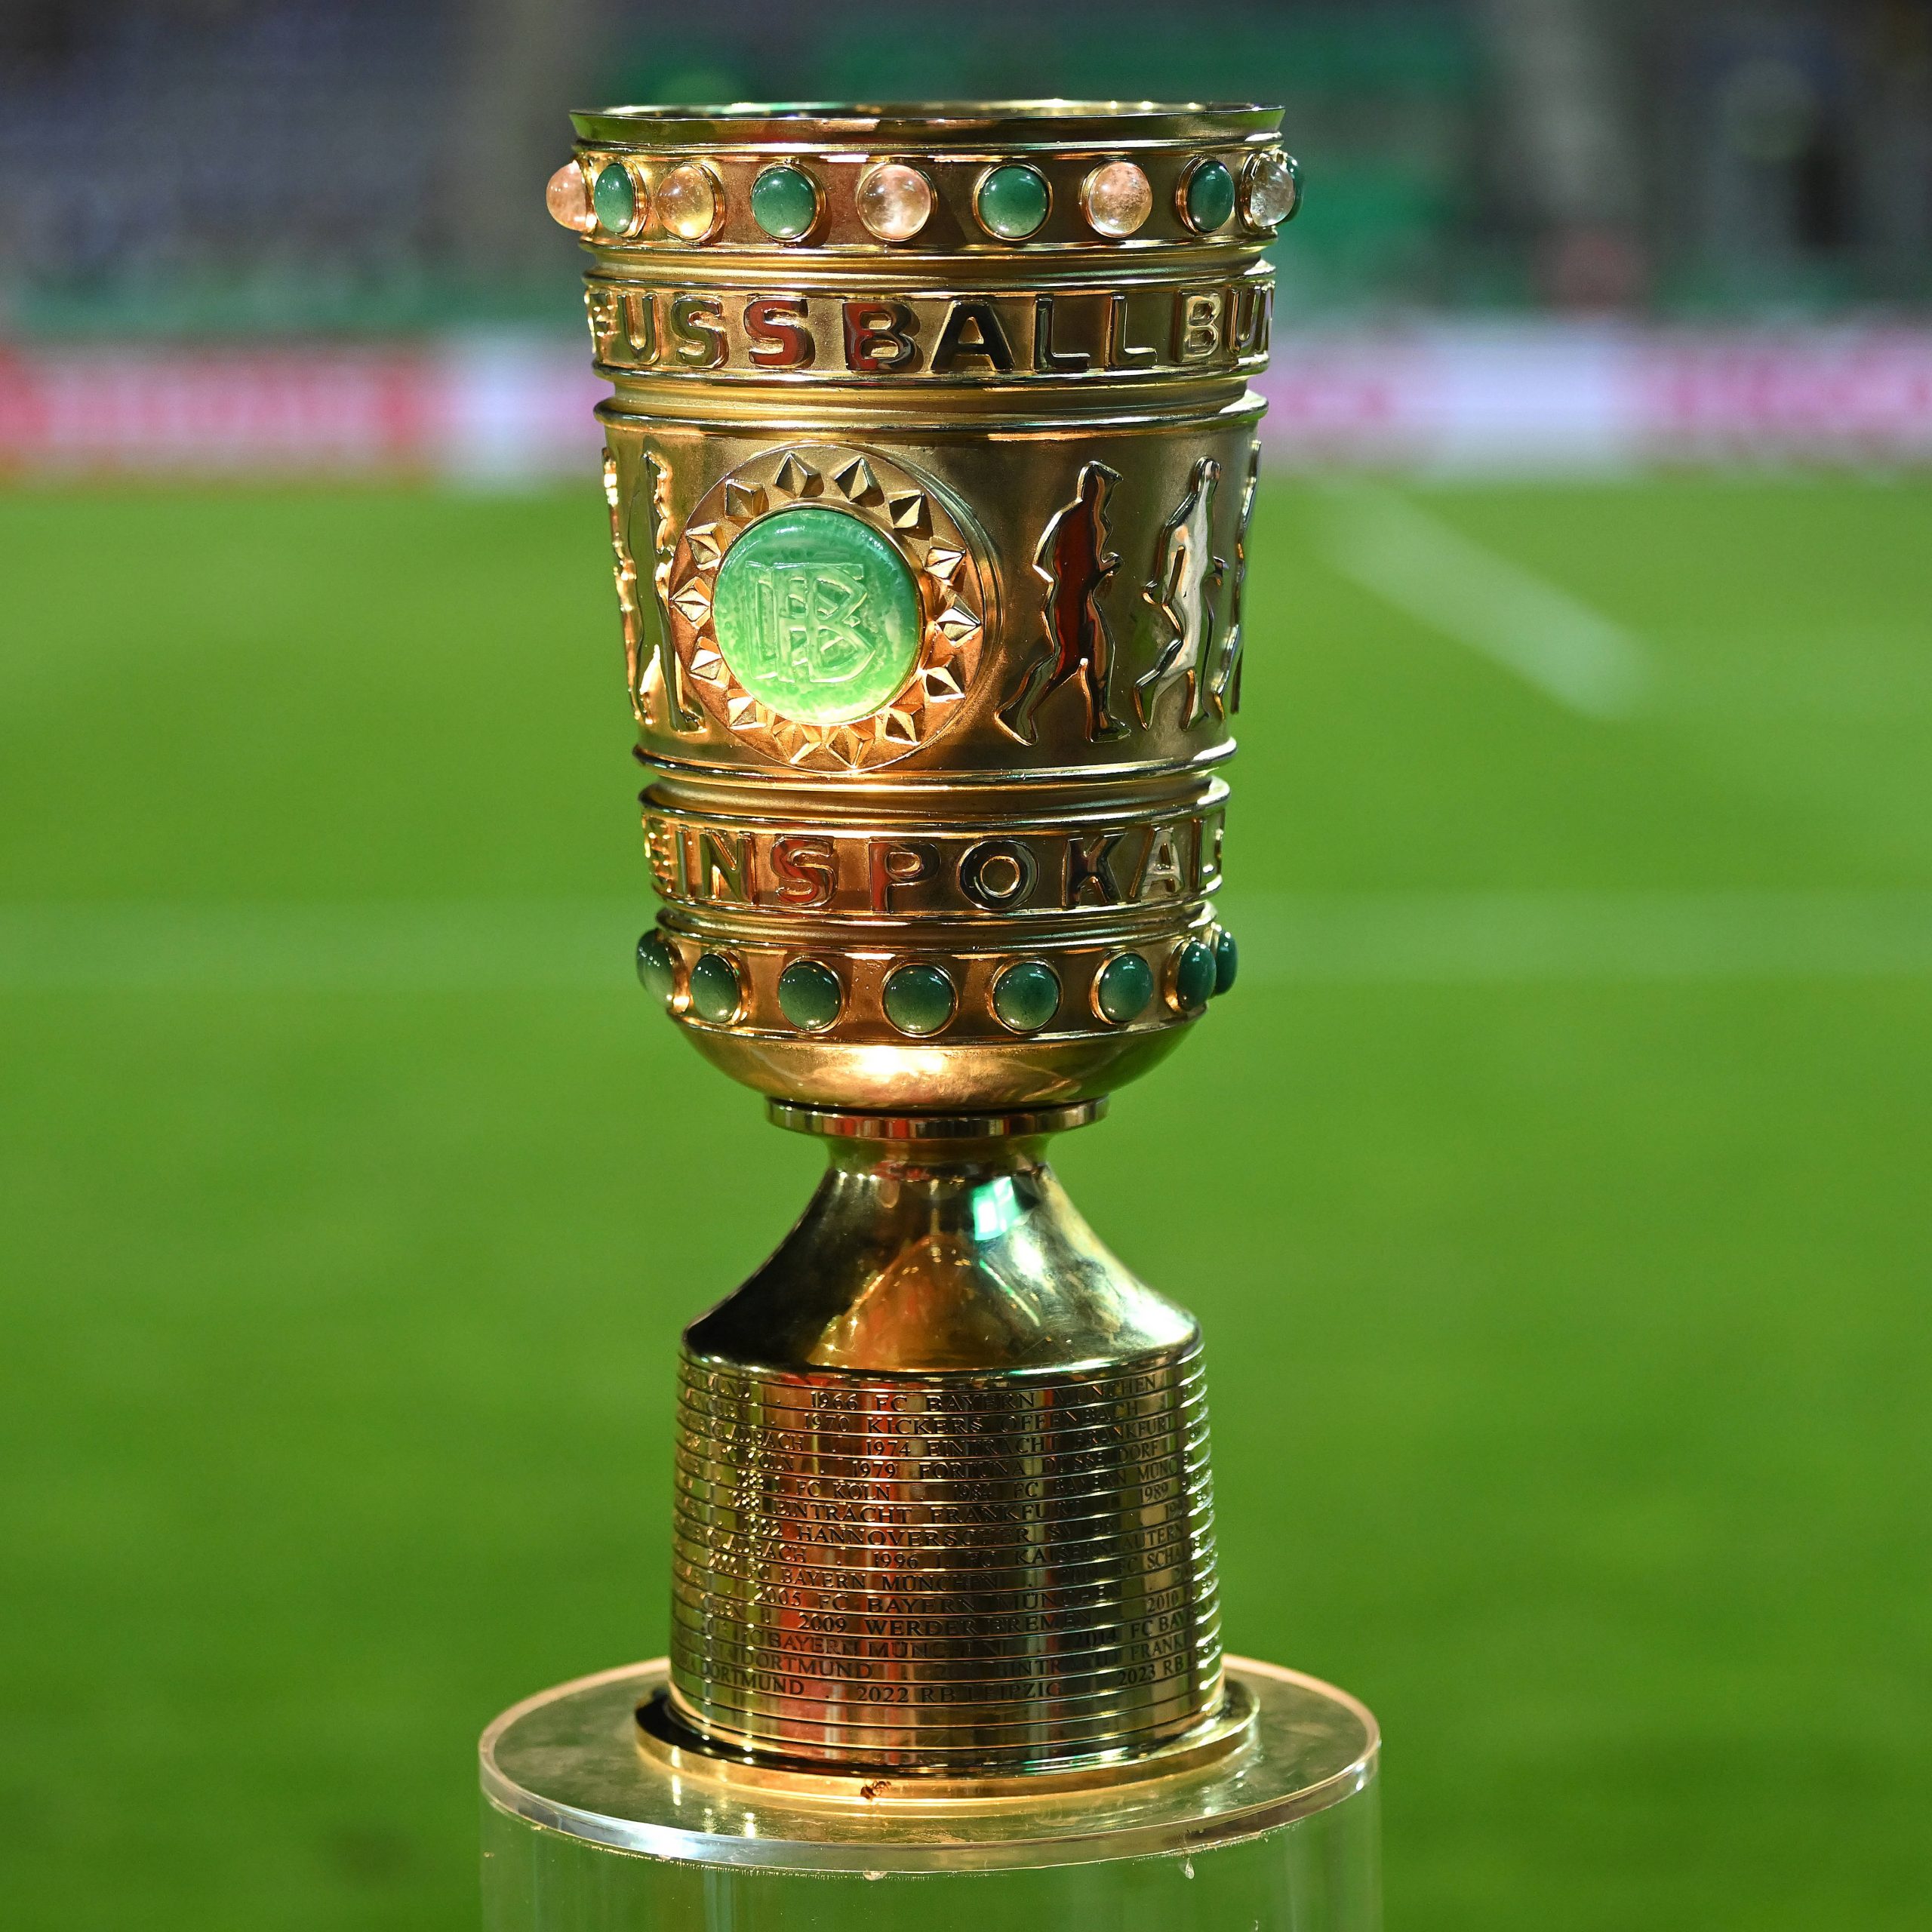 Only 6 Bundesliga clubs remain in the cup